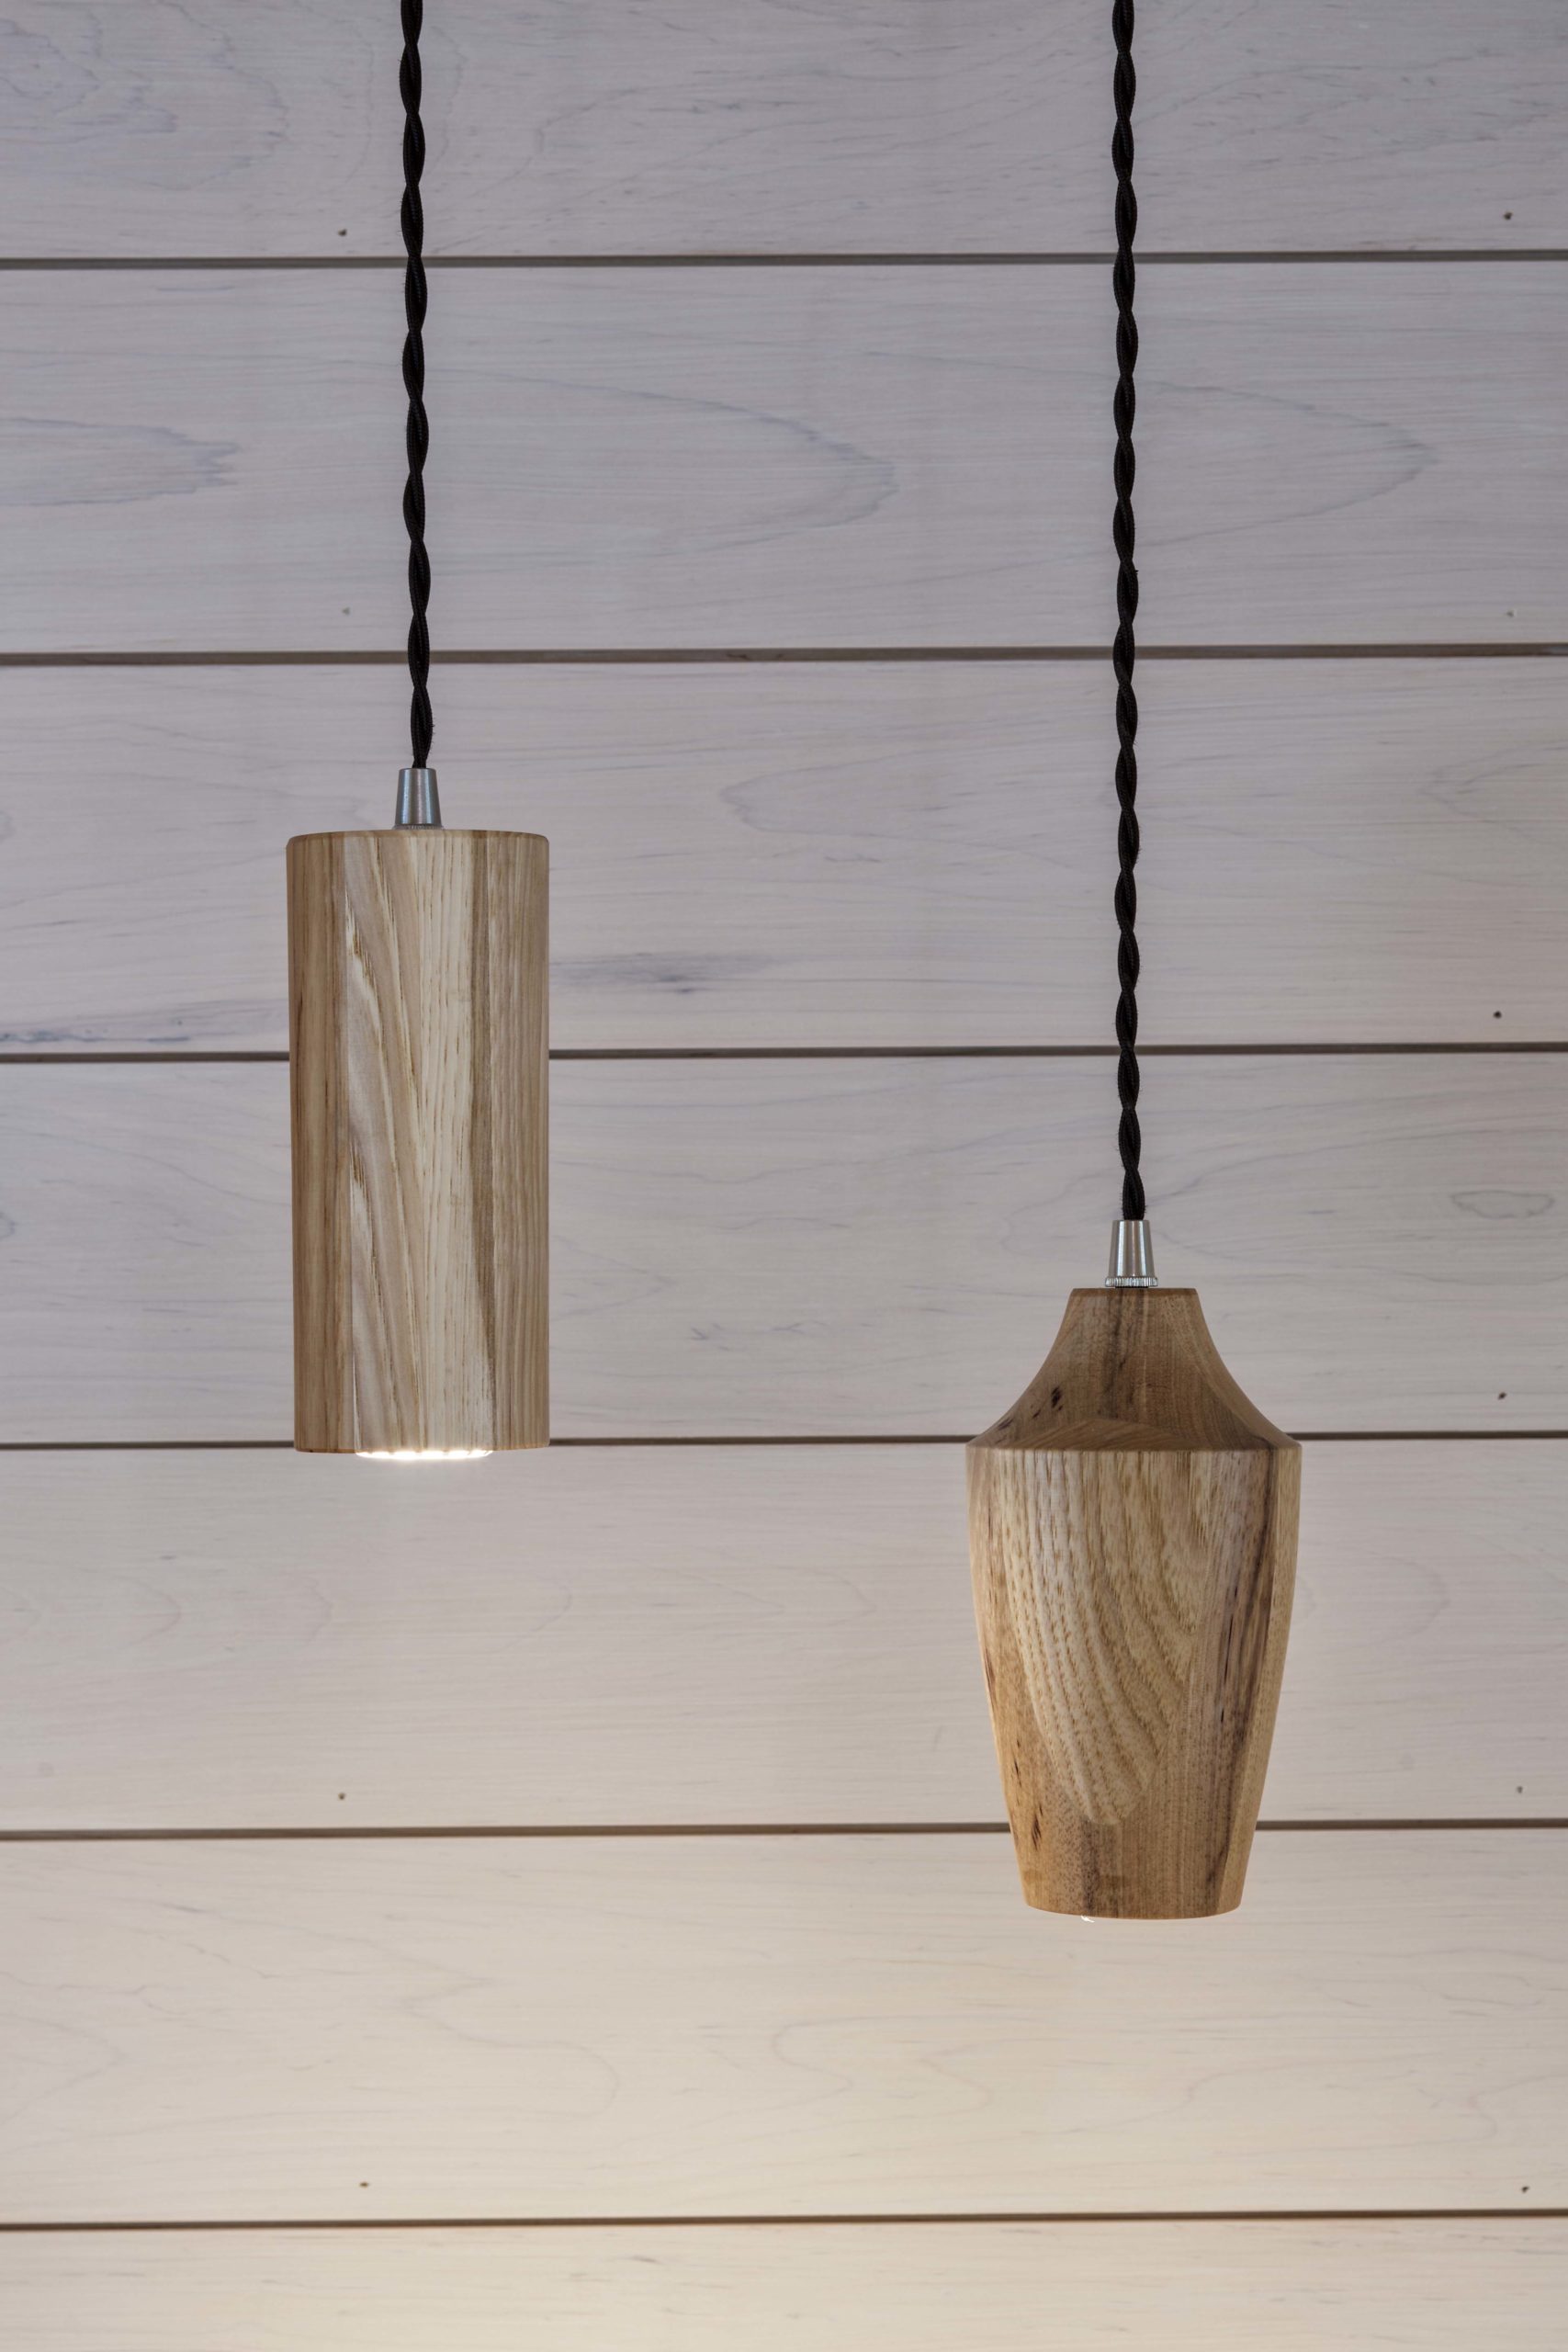 Two wooden pendant lights hanging from a wooden wall.